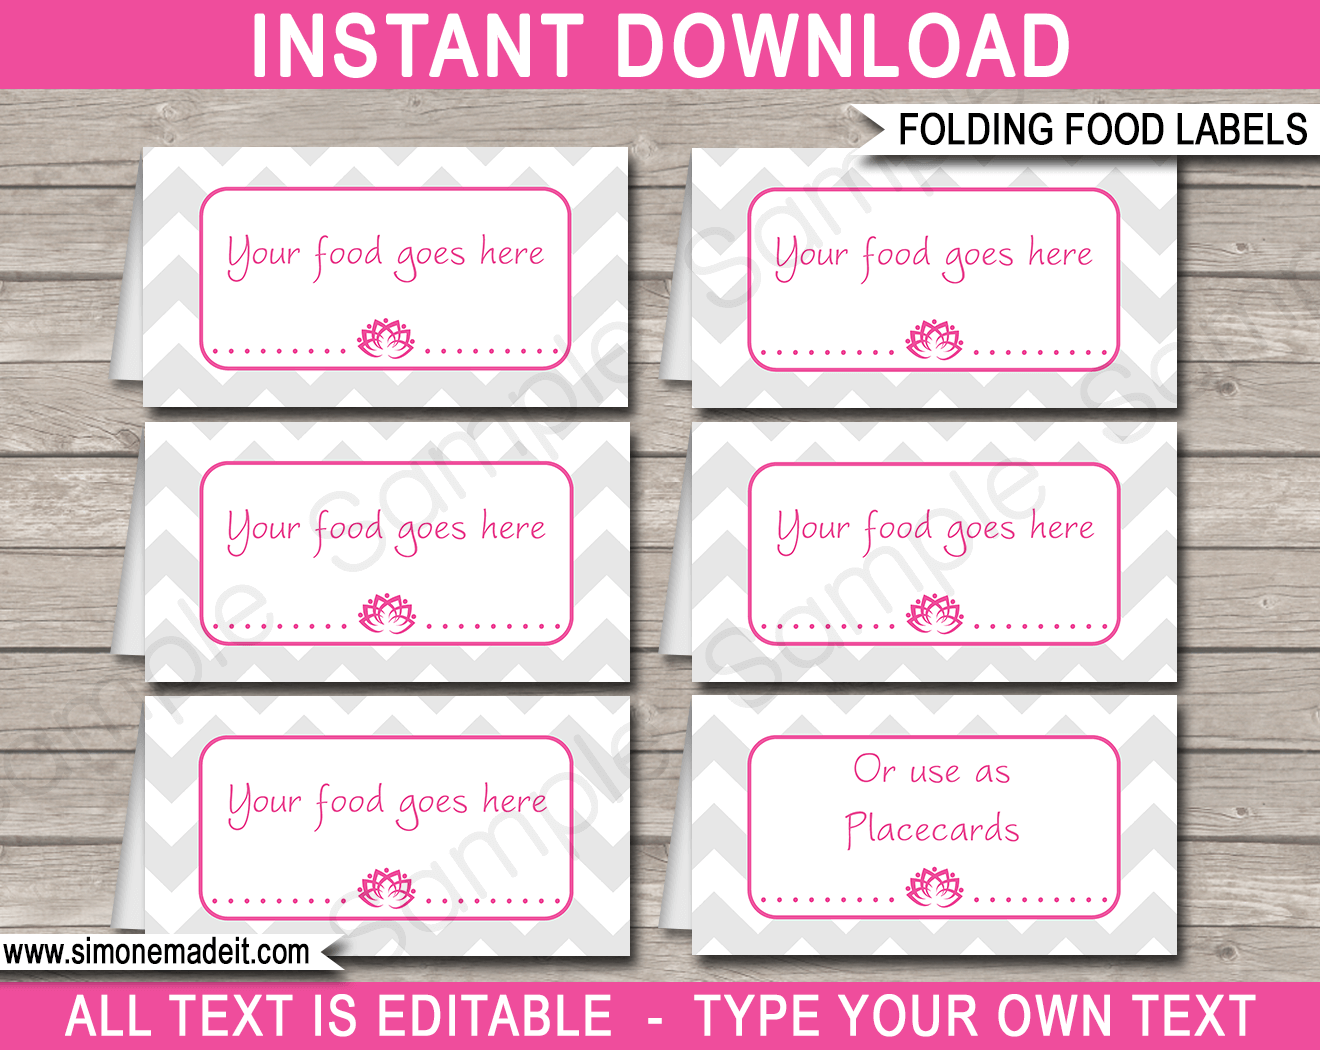 Yoga Theme Food Labels template | Place Cards | Printable Birthday Party Decorations | DIY Editable template | INSTANT DOWNLOAD via simonemadeit.com 